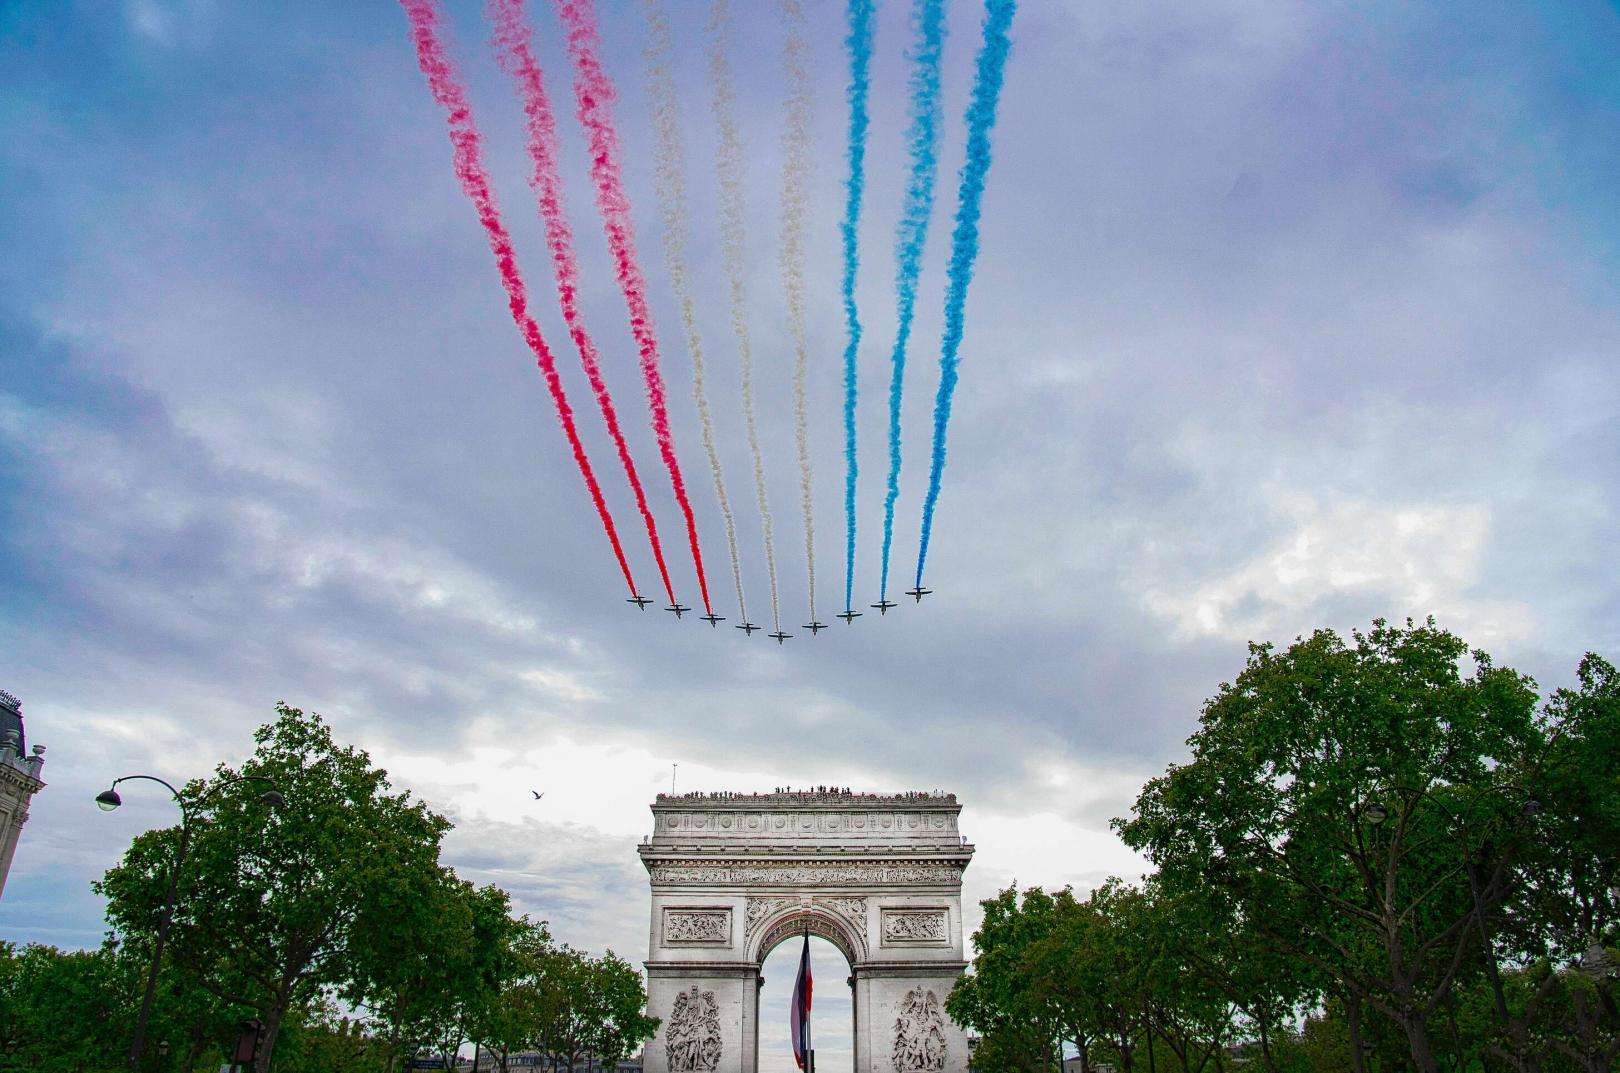 Want to know what to do on Bastille Day in Paris?